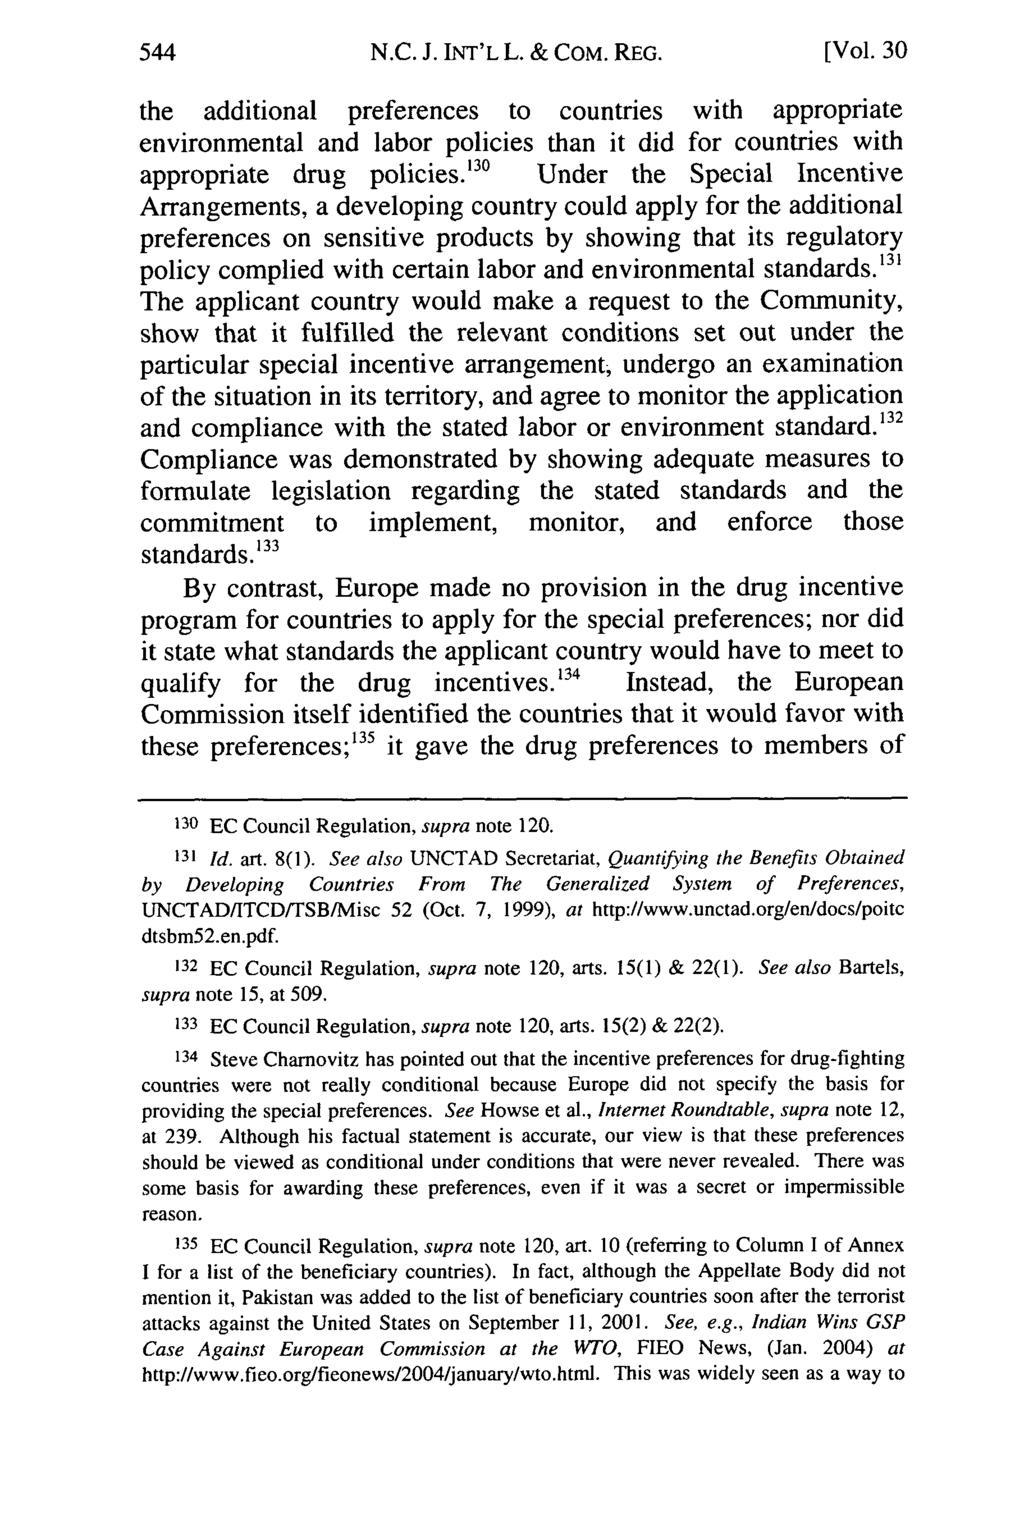 N.C. J. INT'L L. & COM. REG. [Vol. 30 the additional preferences to countries with appropriate environmental and labor policies than it did for countries with appropriate drug policies.